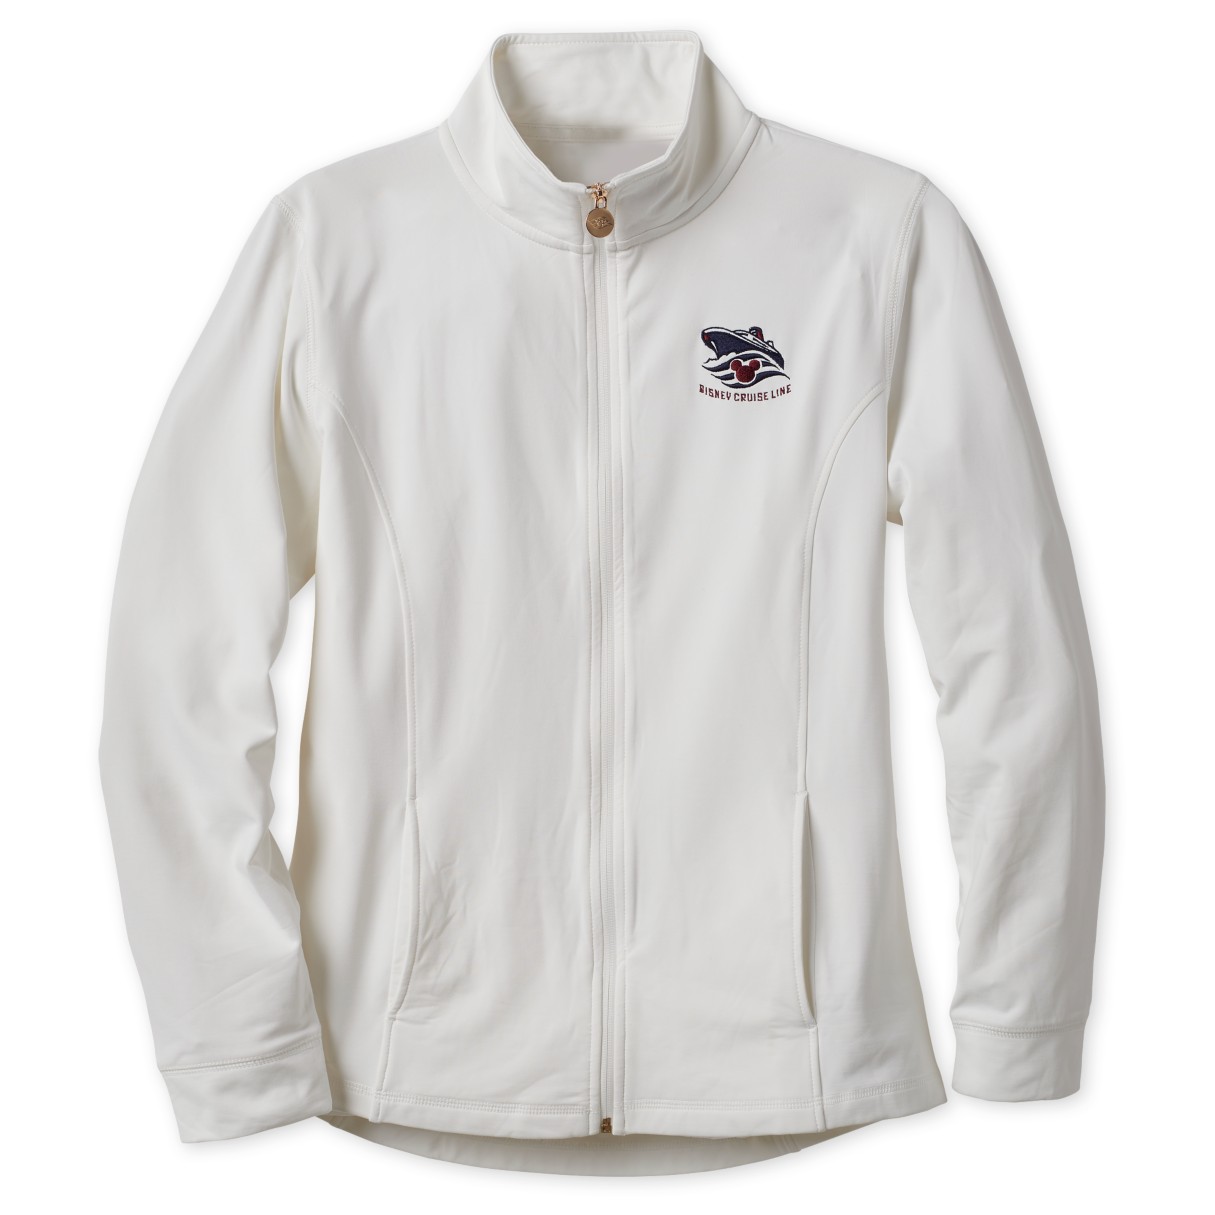 Disney Cruise Line Zip Jacket for Adults